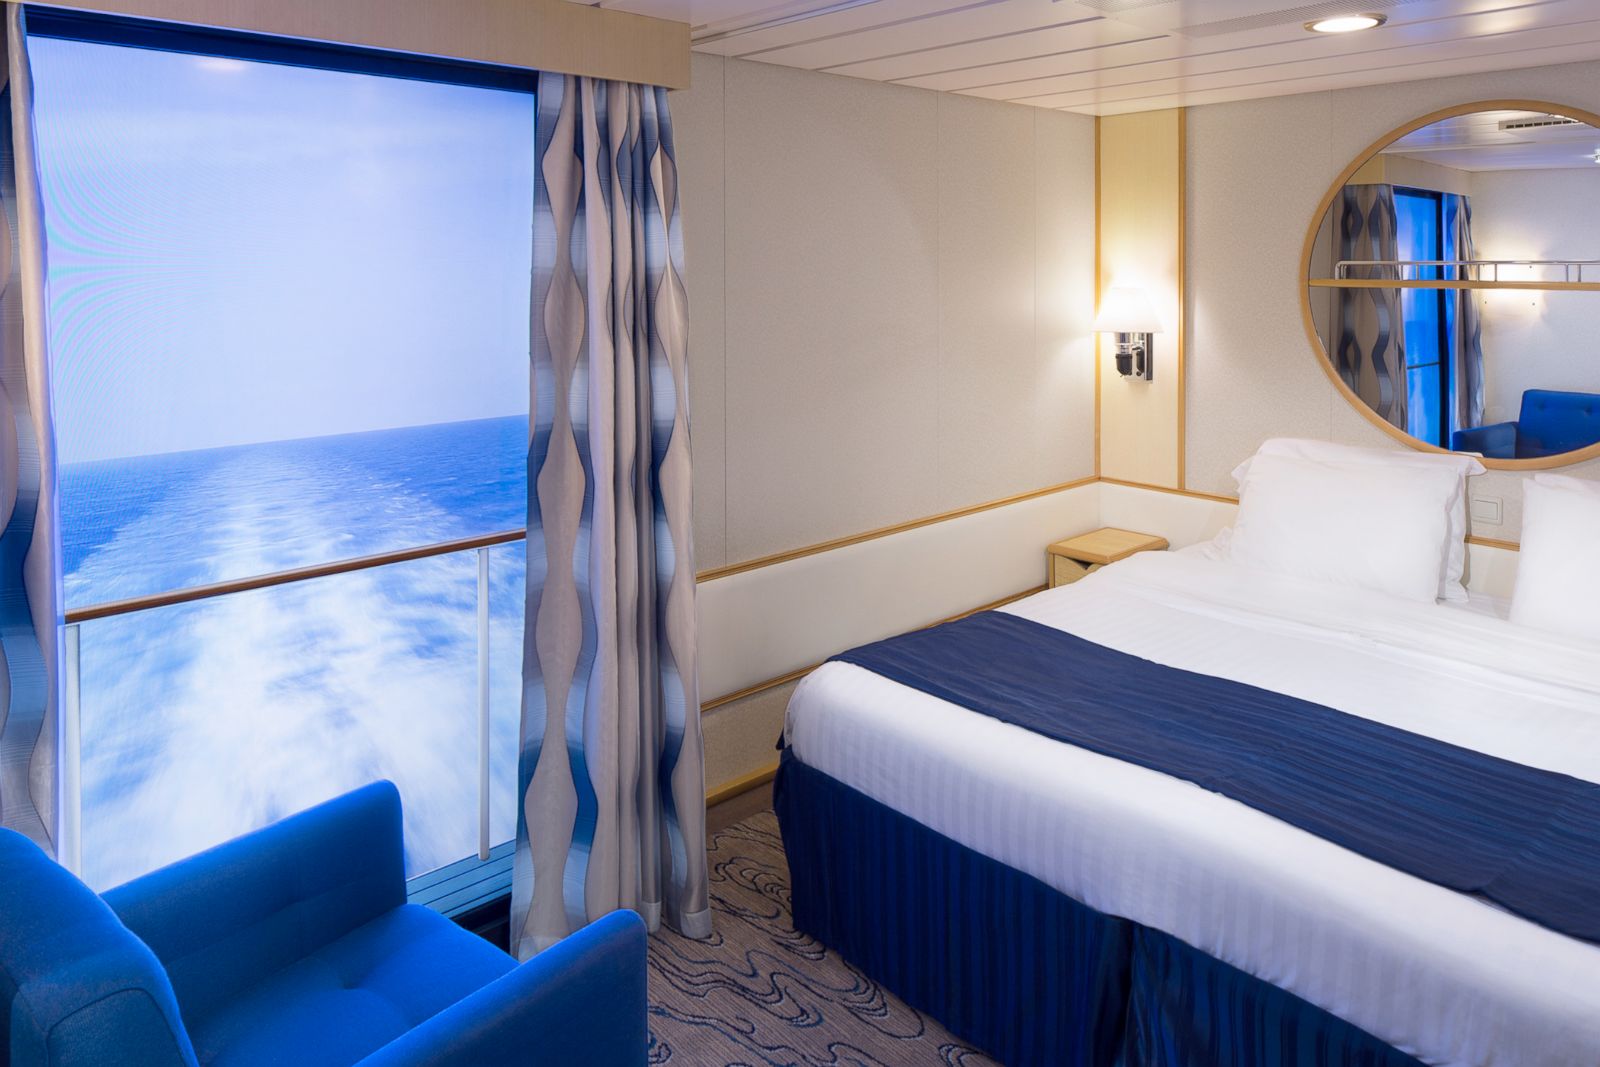 Best Inside Cabins: Royal Caribbean International Picture | The Best